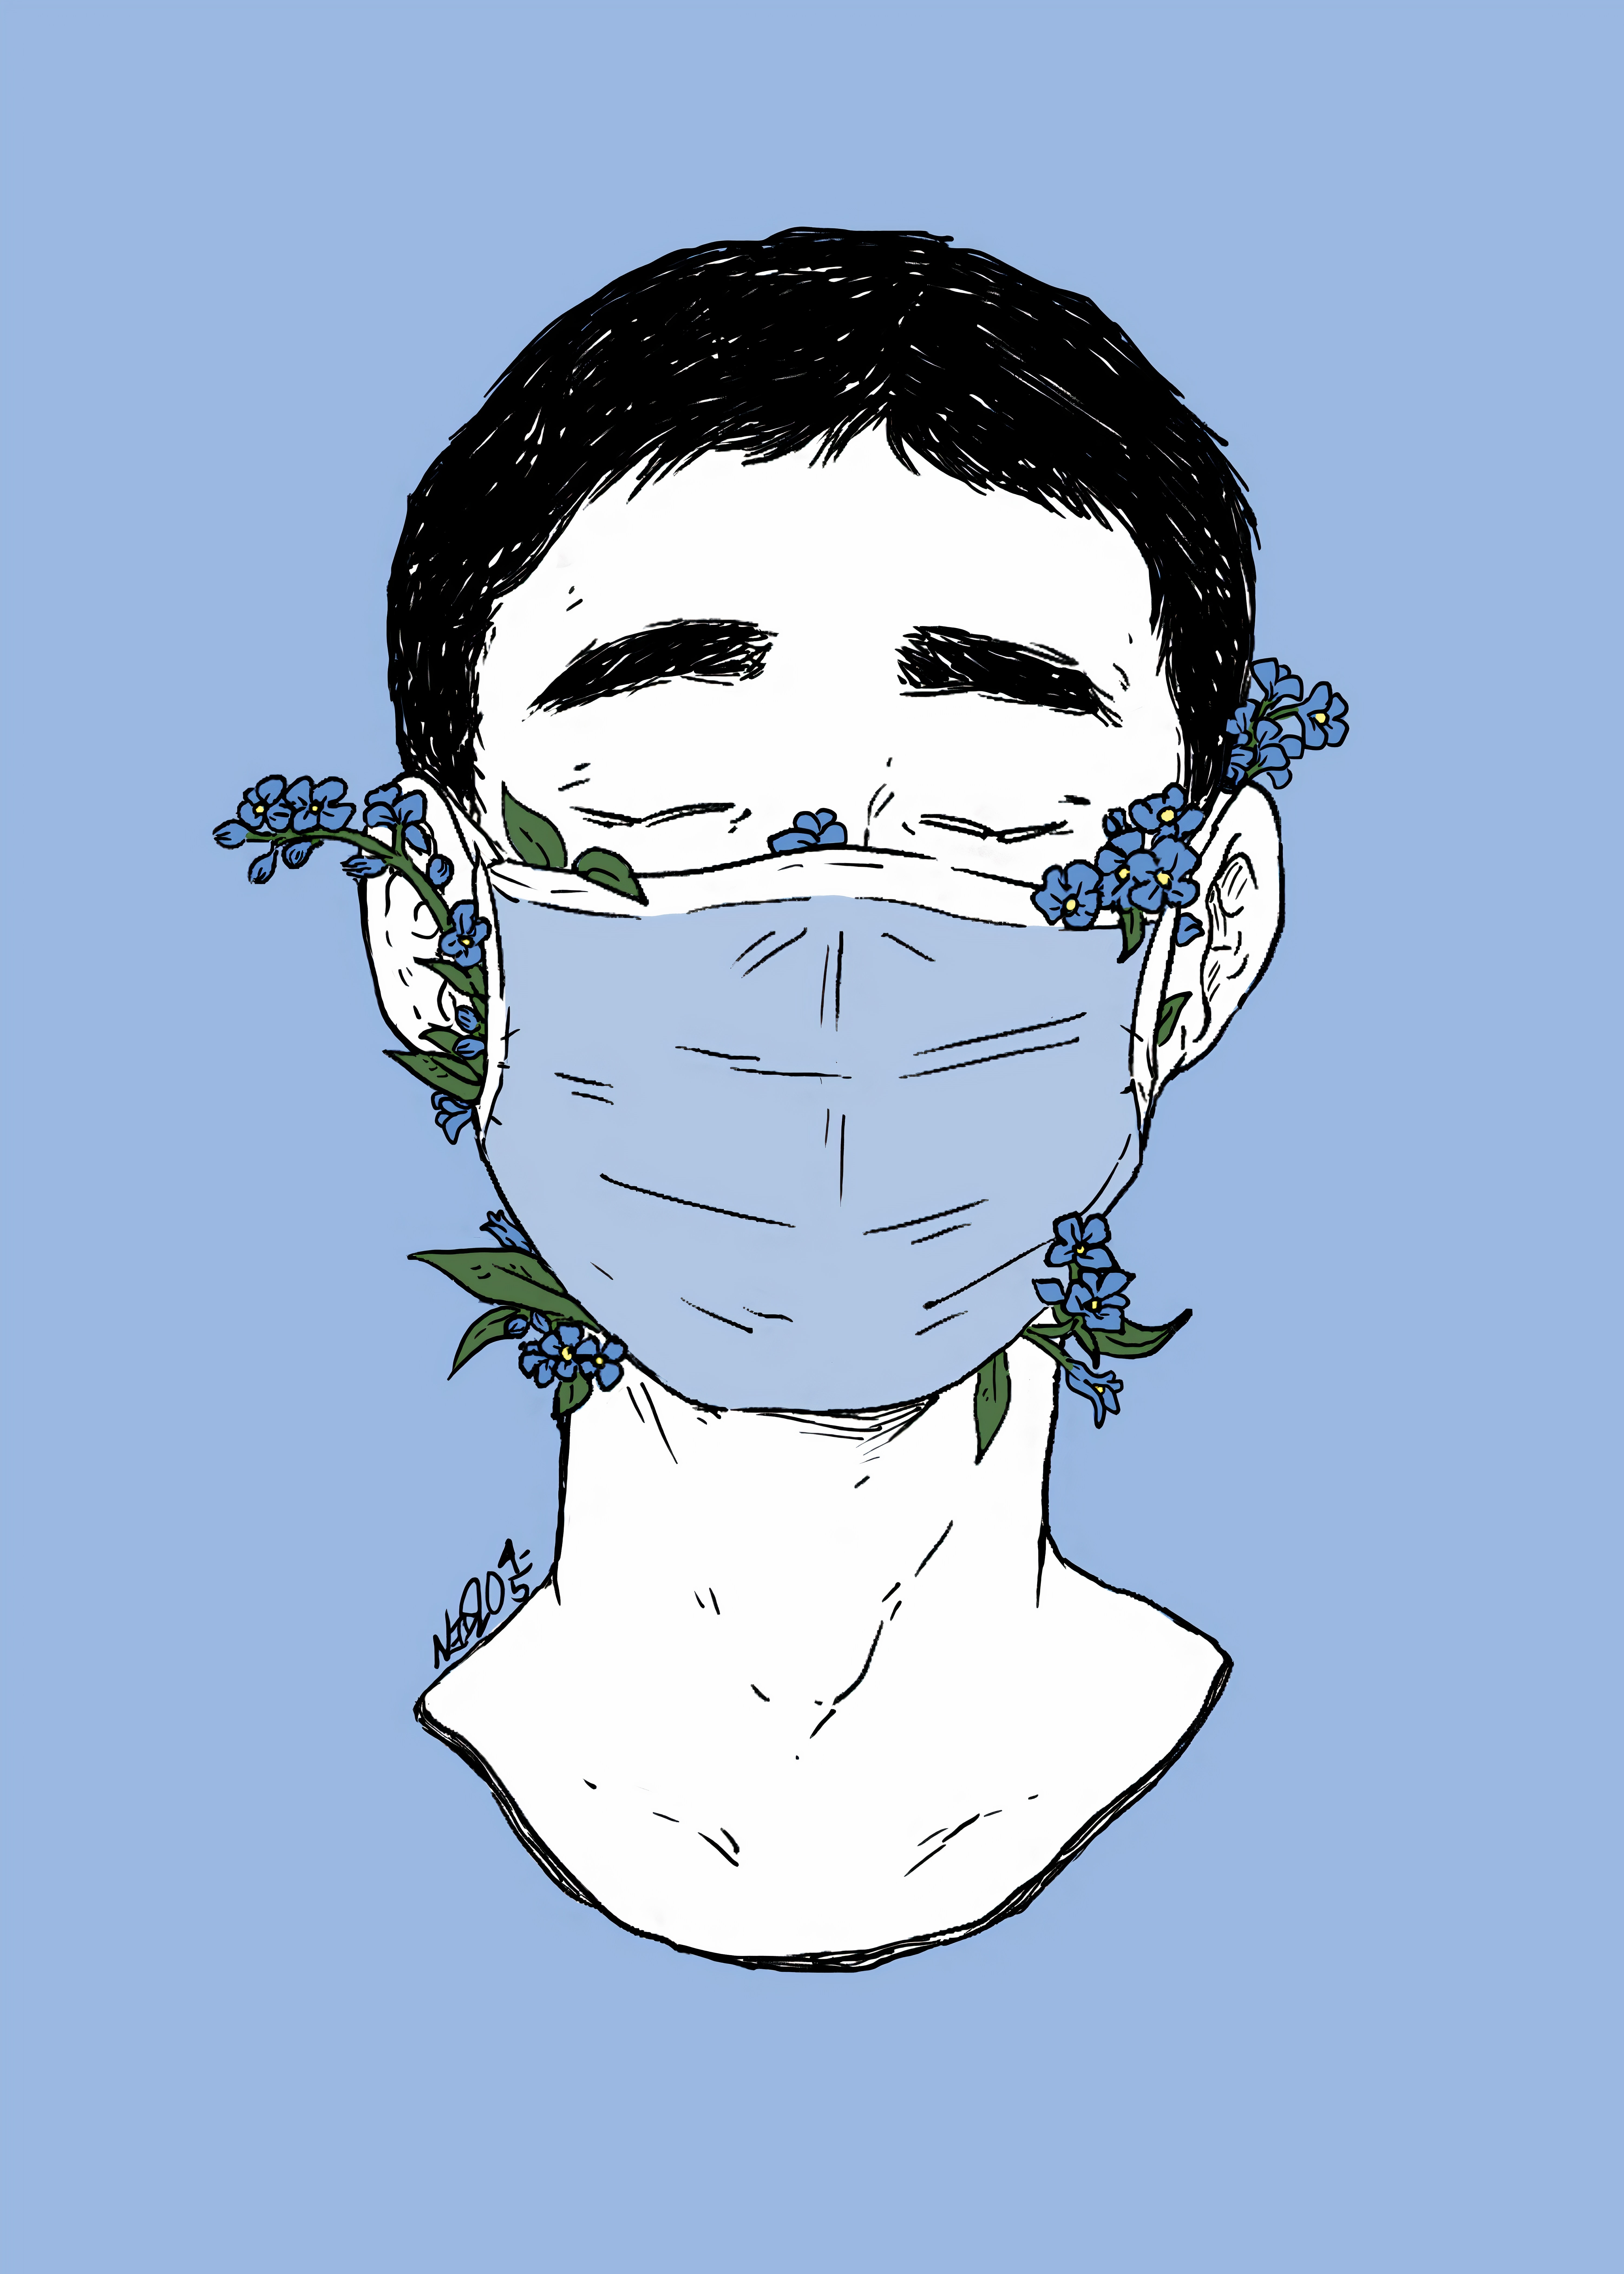 Man wearing mask with flowers